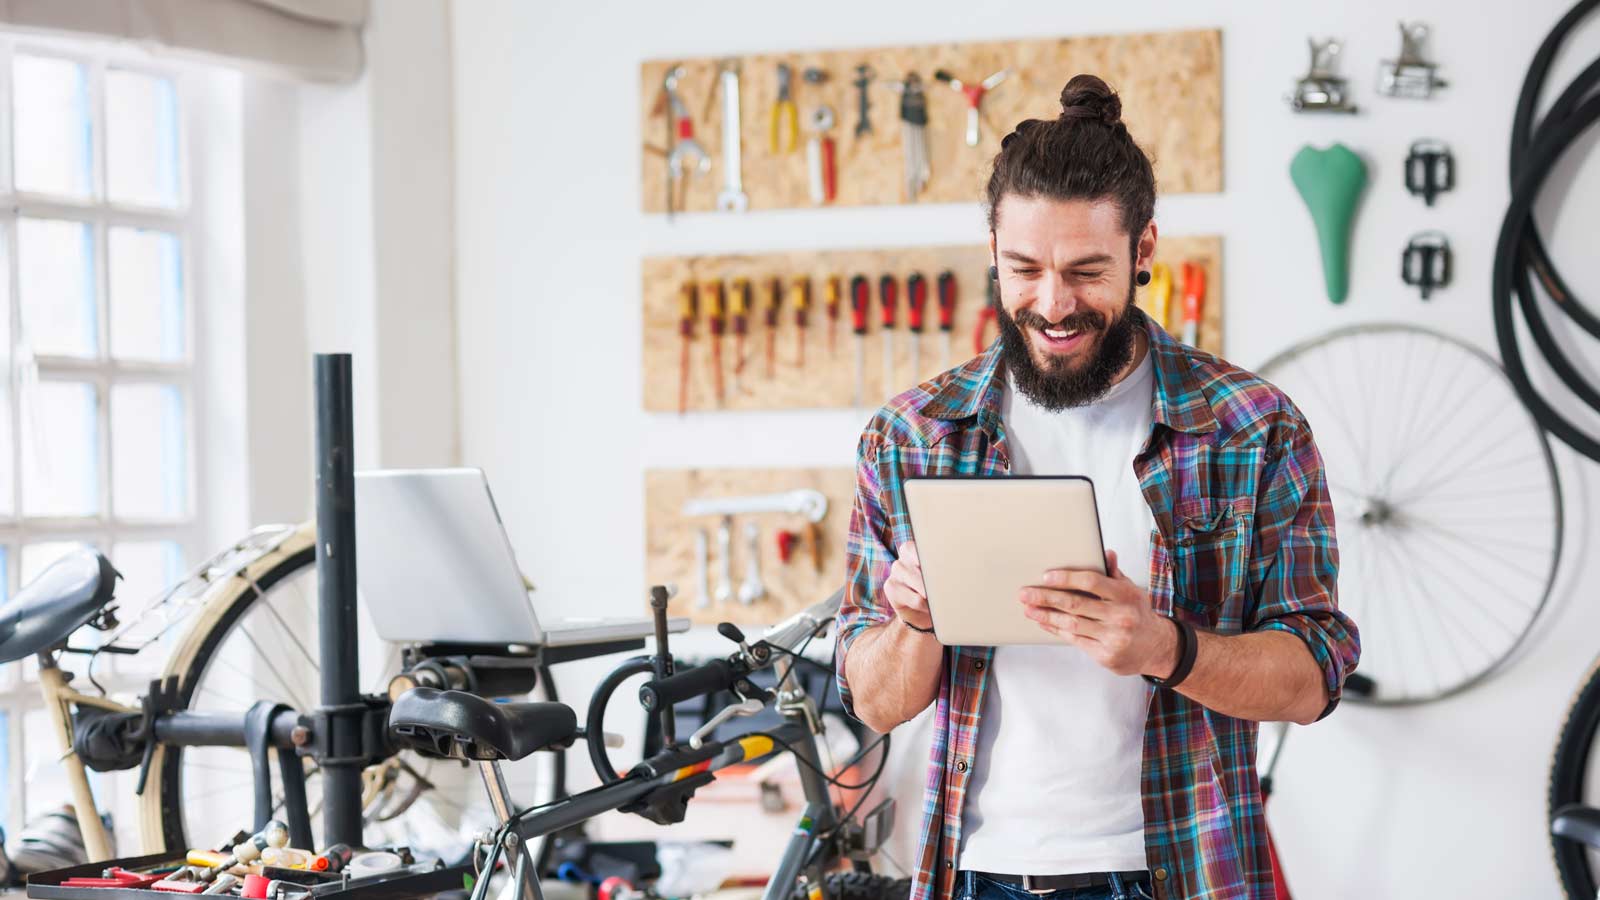 In a bike shop, a bearded young employee uses a tablet.